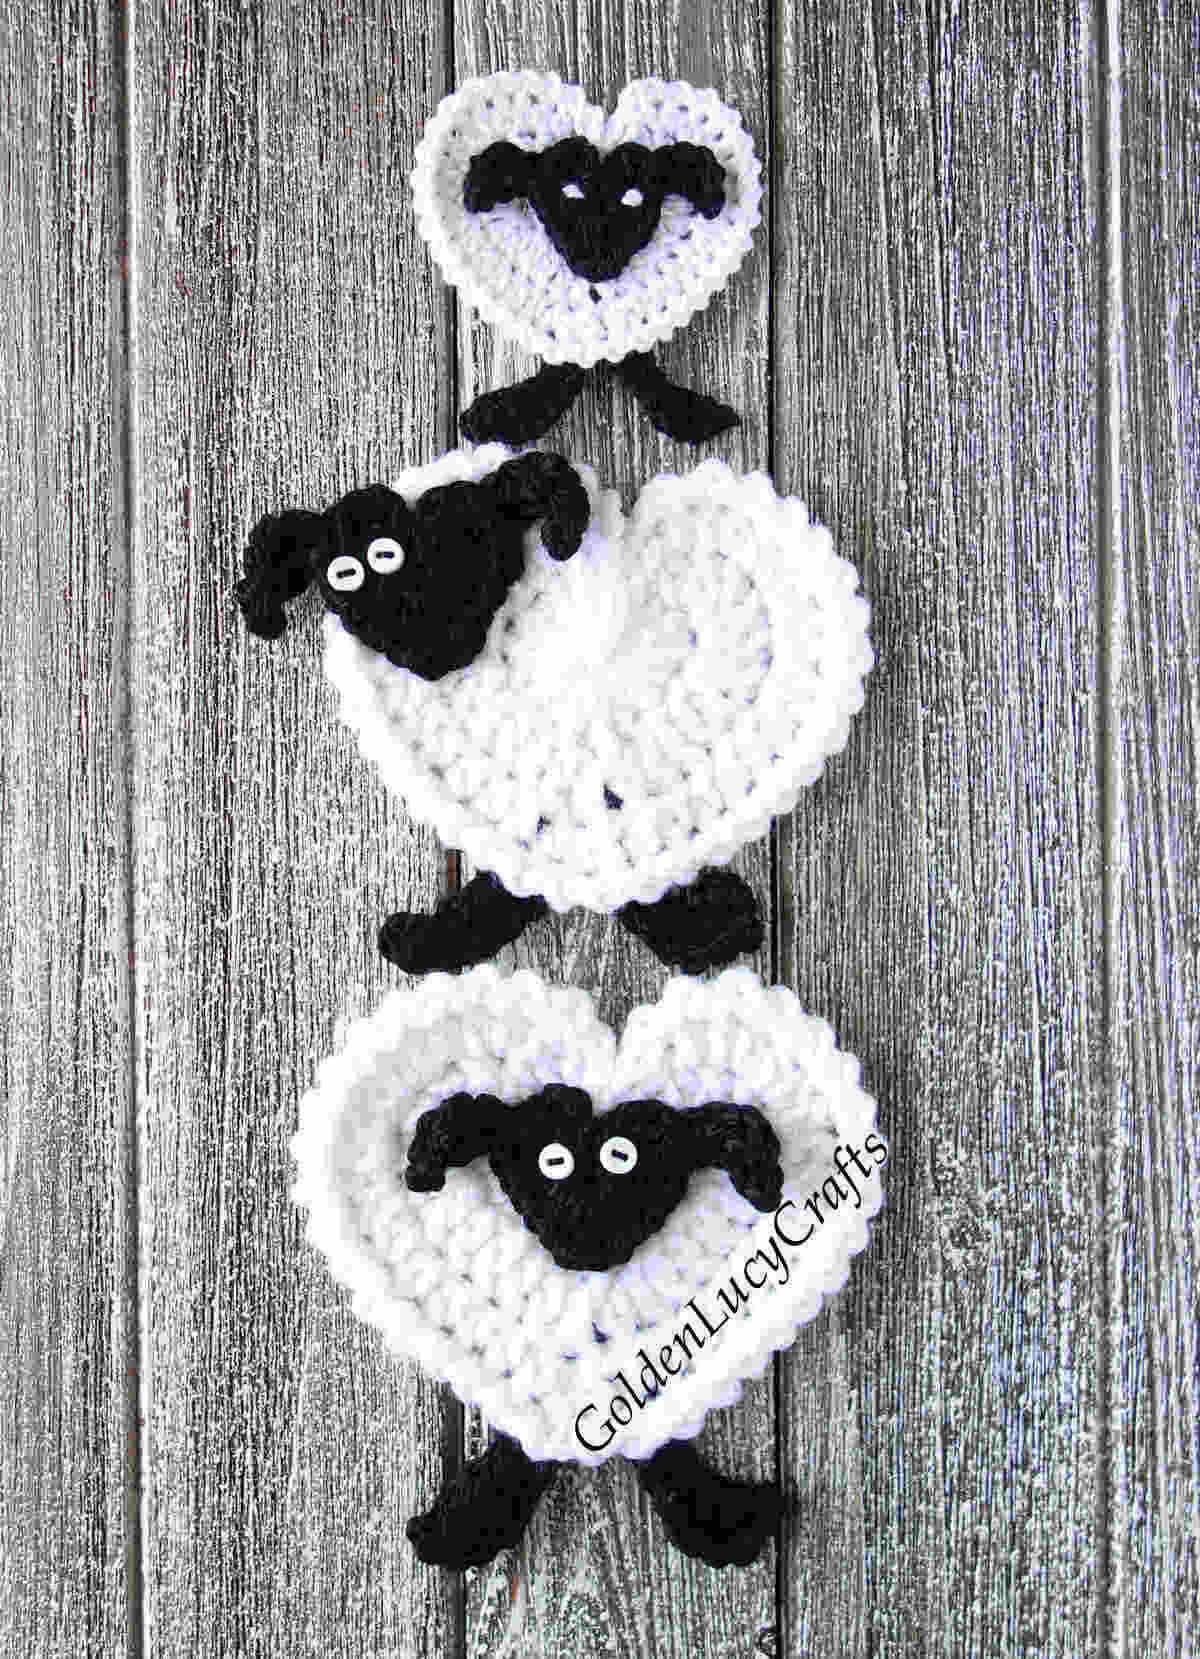 Three crochet sheep appliques placed on top of each other.